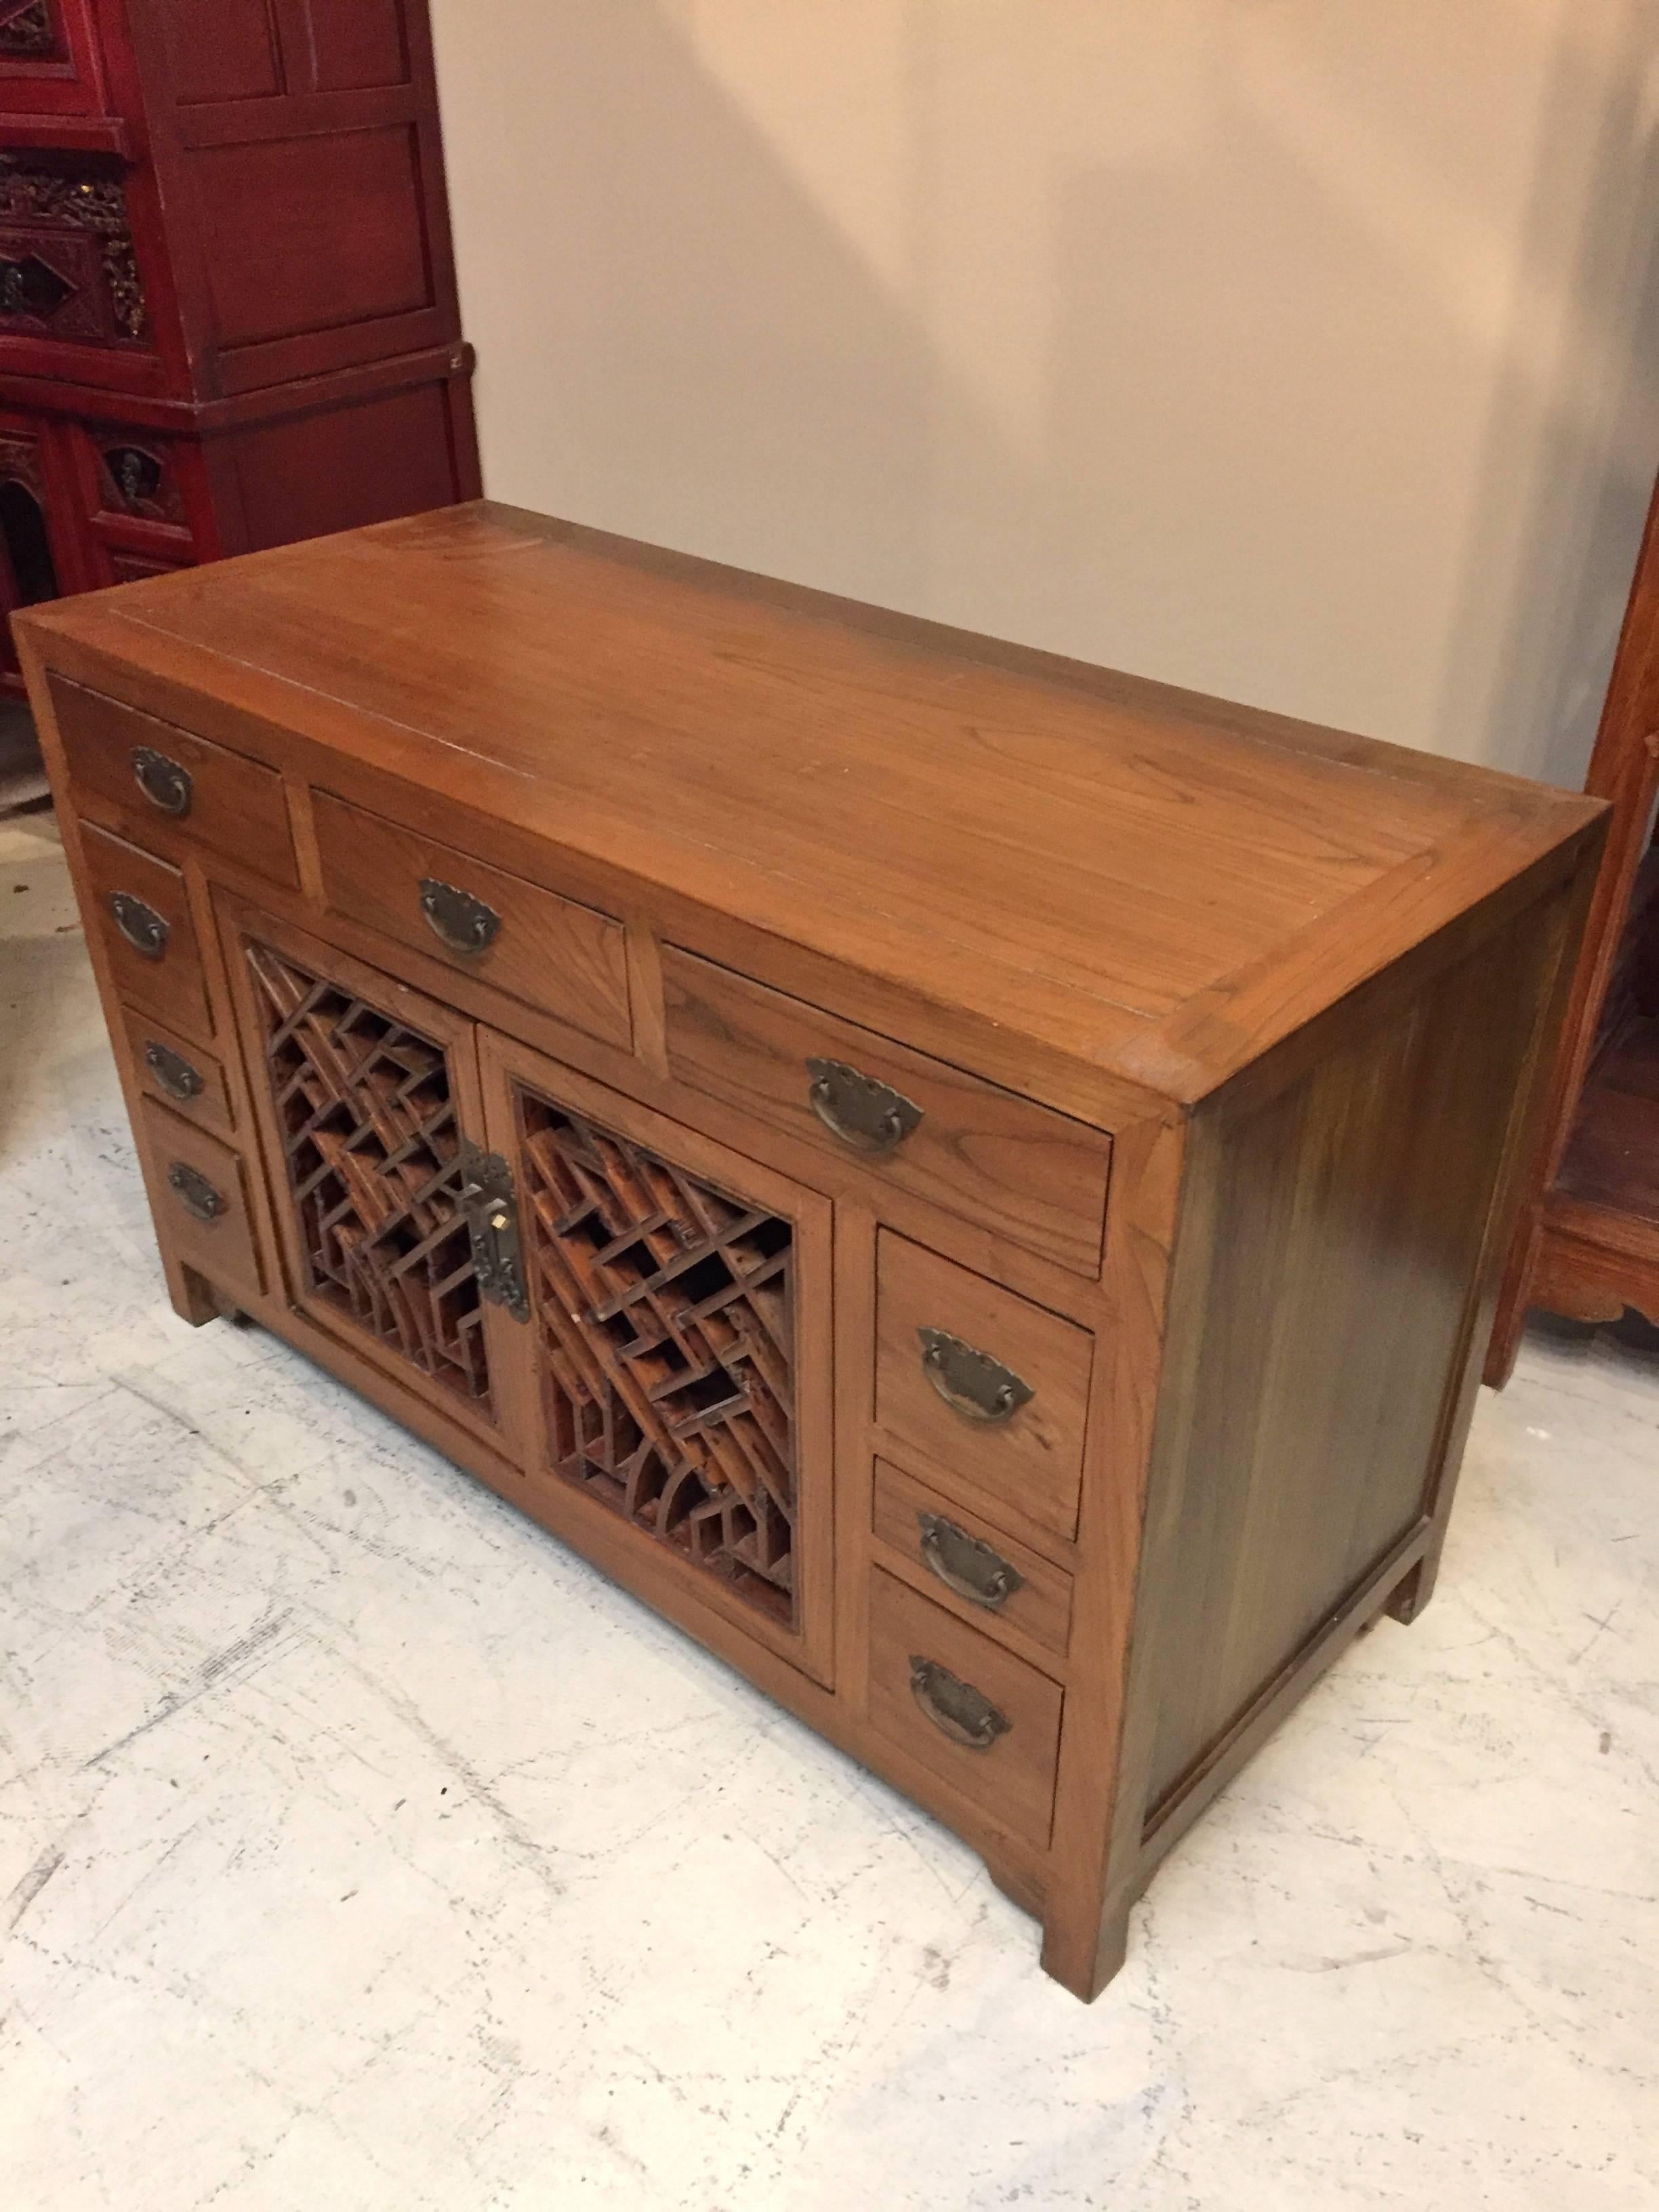 Substantial, solid wood Chinese chest with antique lattice work has nine full-length drawers. The wood is elmwood. It's prized for its beautiful, mountain like grains. Clear finish displays the color and patterns well. Butterfly shaped bronze